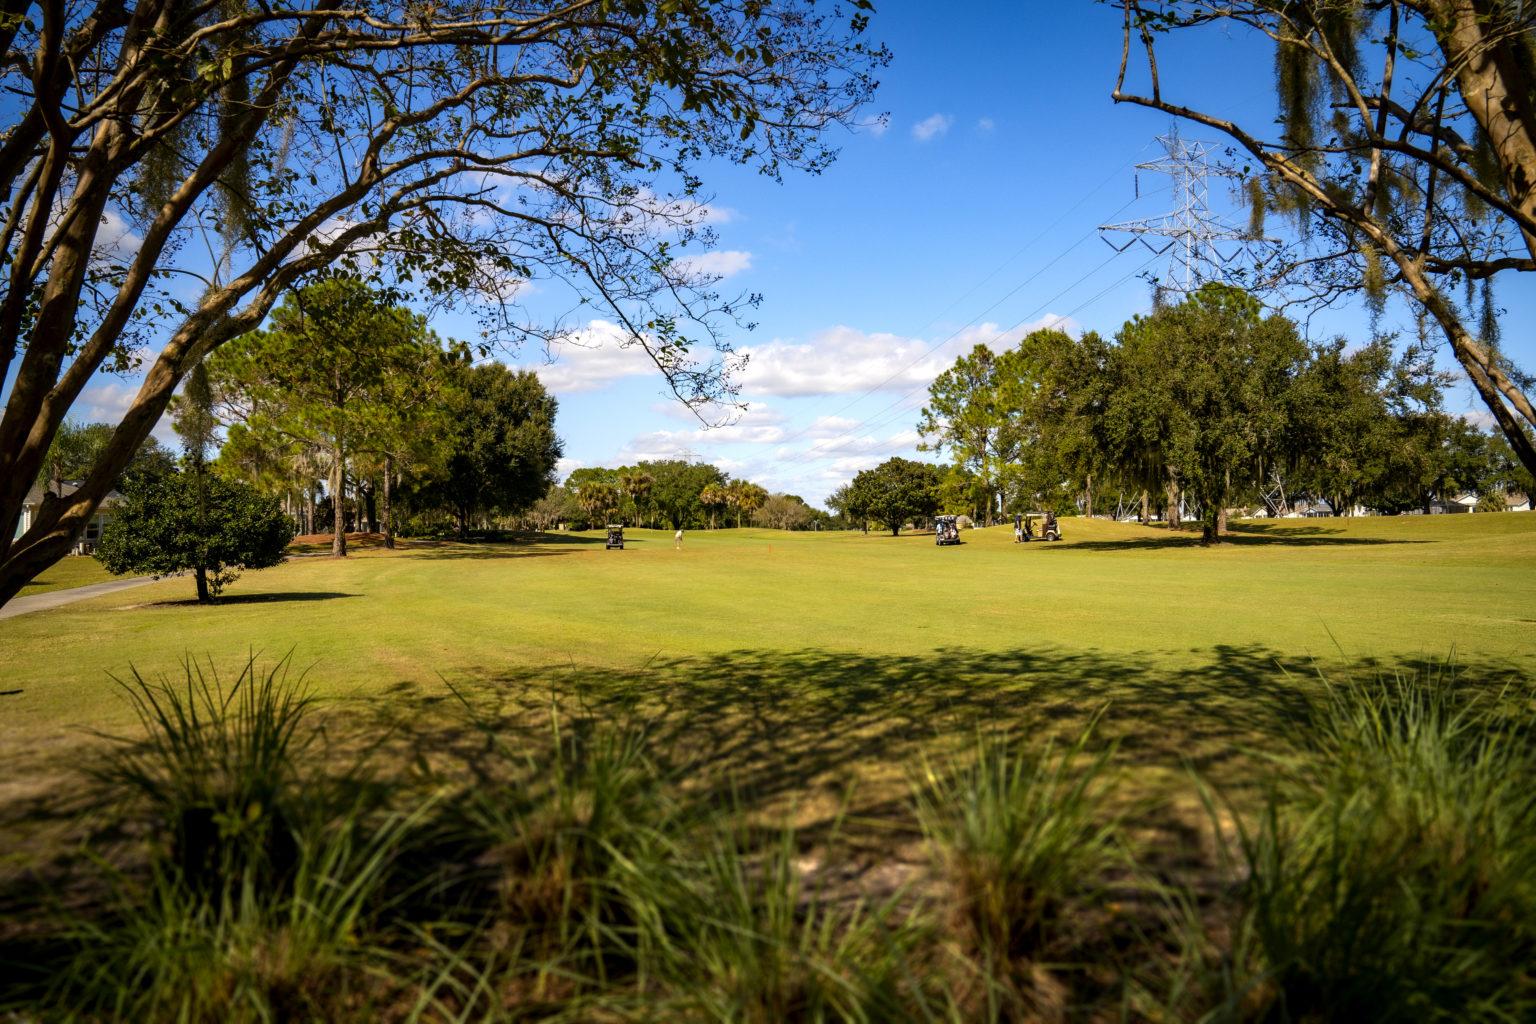 There are many golf carts and trees on the golf course - Del La Vista Executive Golf Course